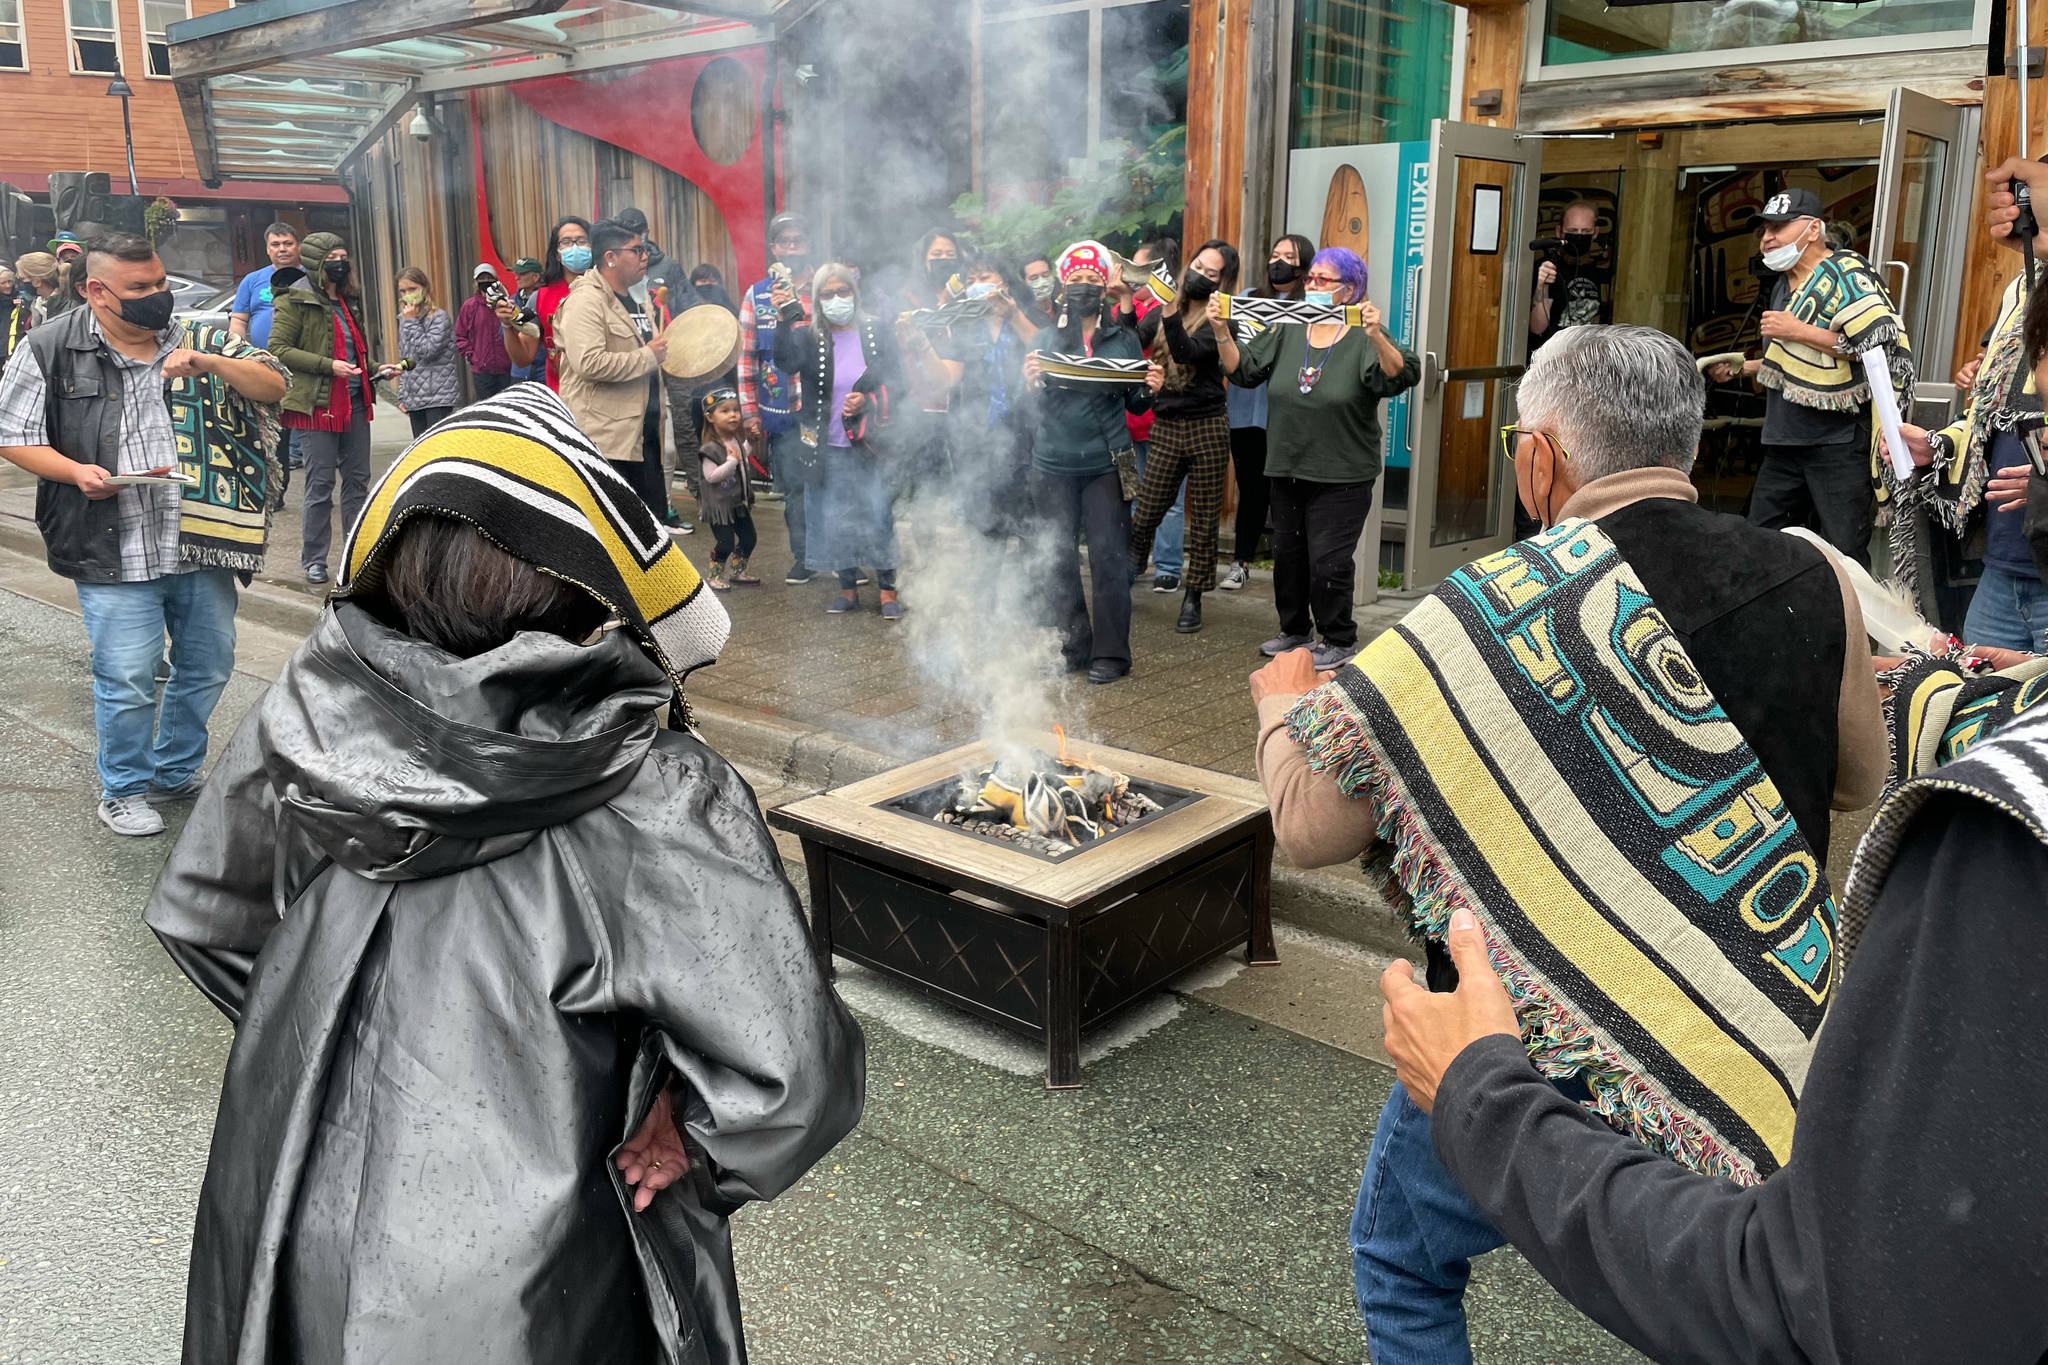 Michael S. Lockett / Juneau Empire 
Participants burn an example of a commercial garment that led to a now-settled intellectual property lawsuit in a ceremony commemorating the settlement with the fashion company on Friday, Aug. 13, 2021.